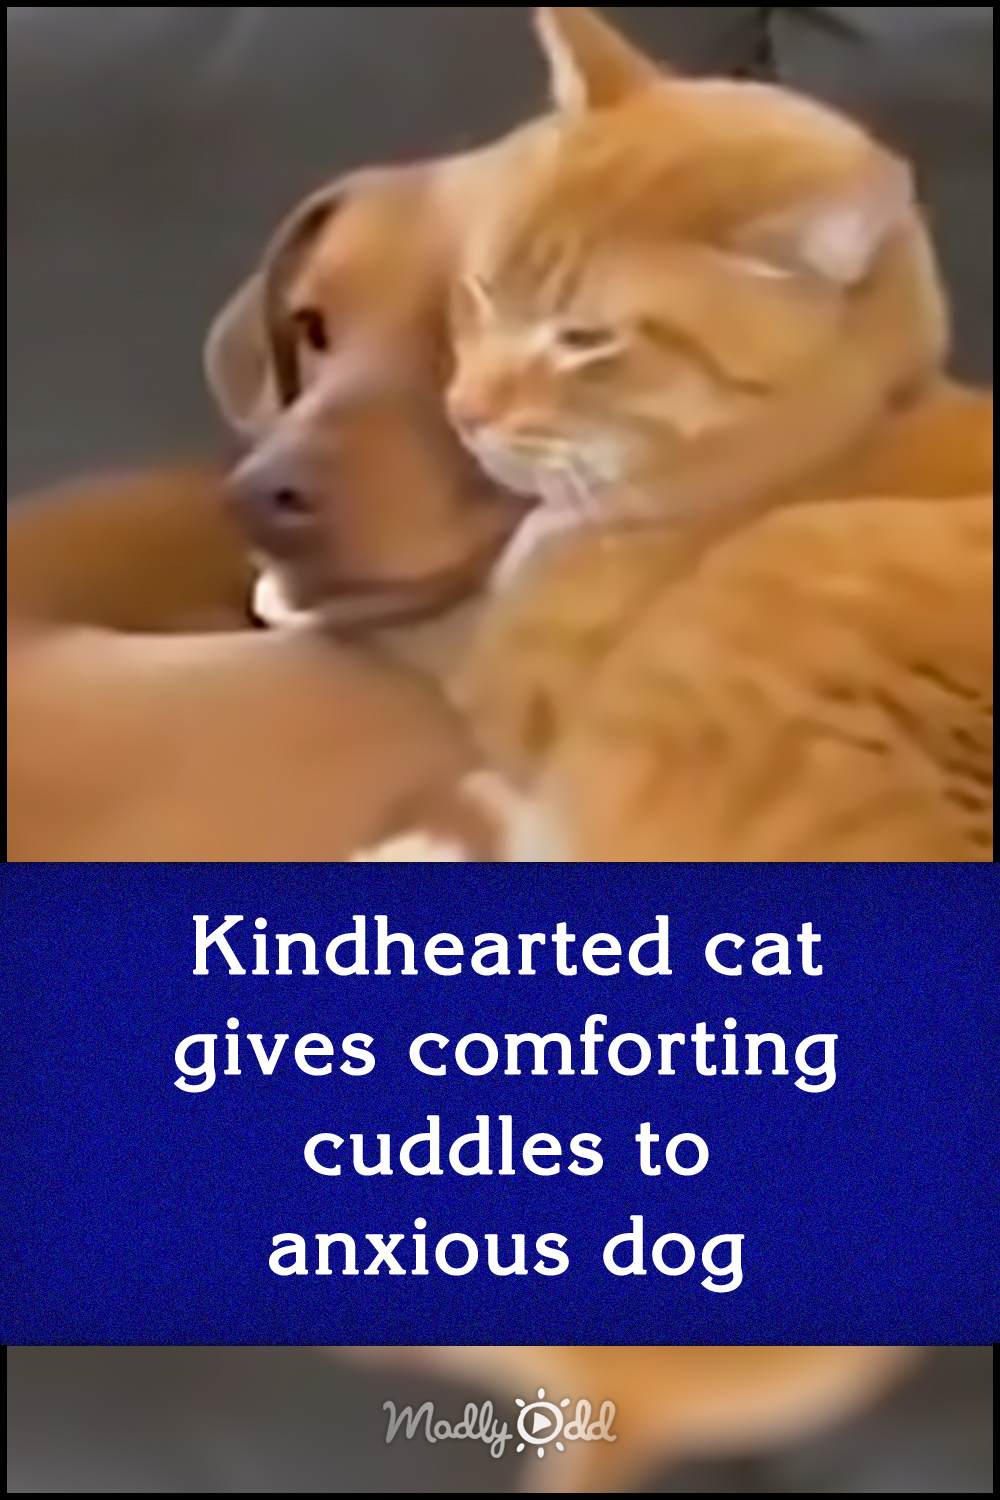 Kindhearted cat gives comforting cuddles to anxious dog